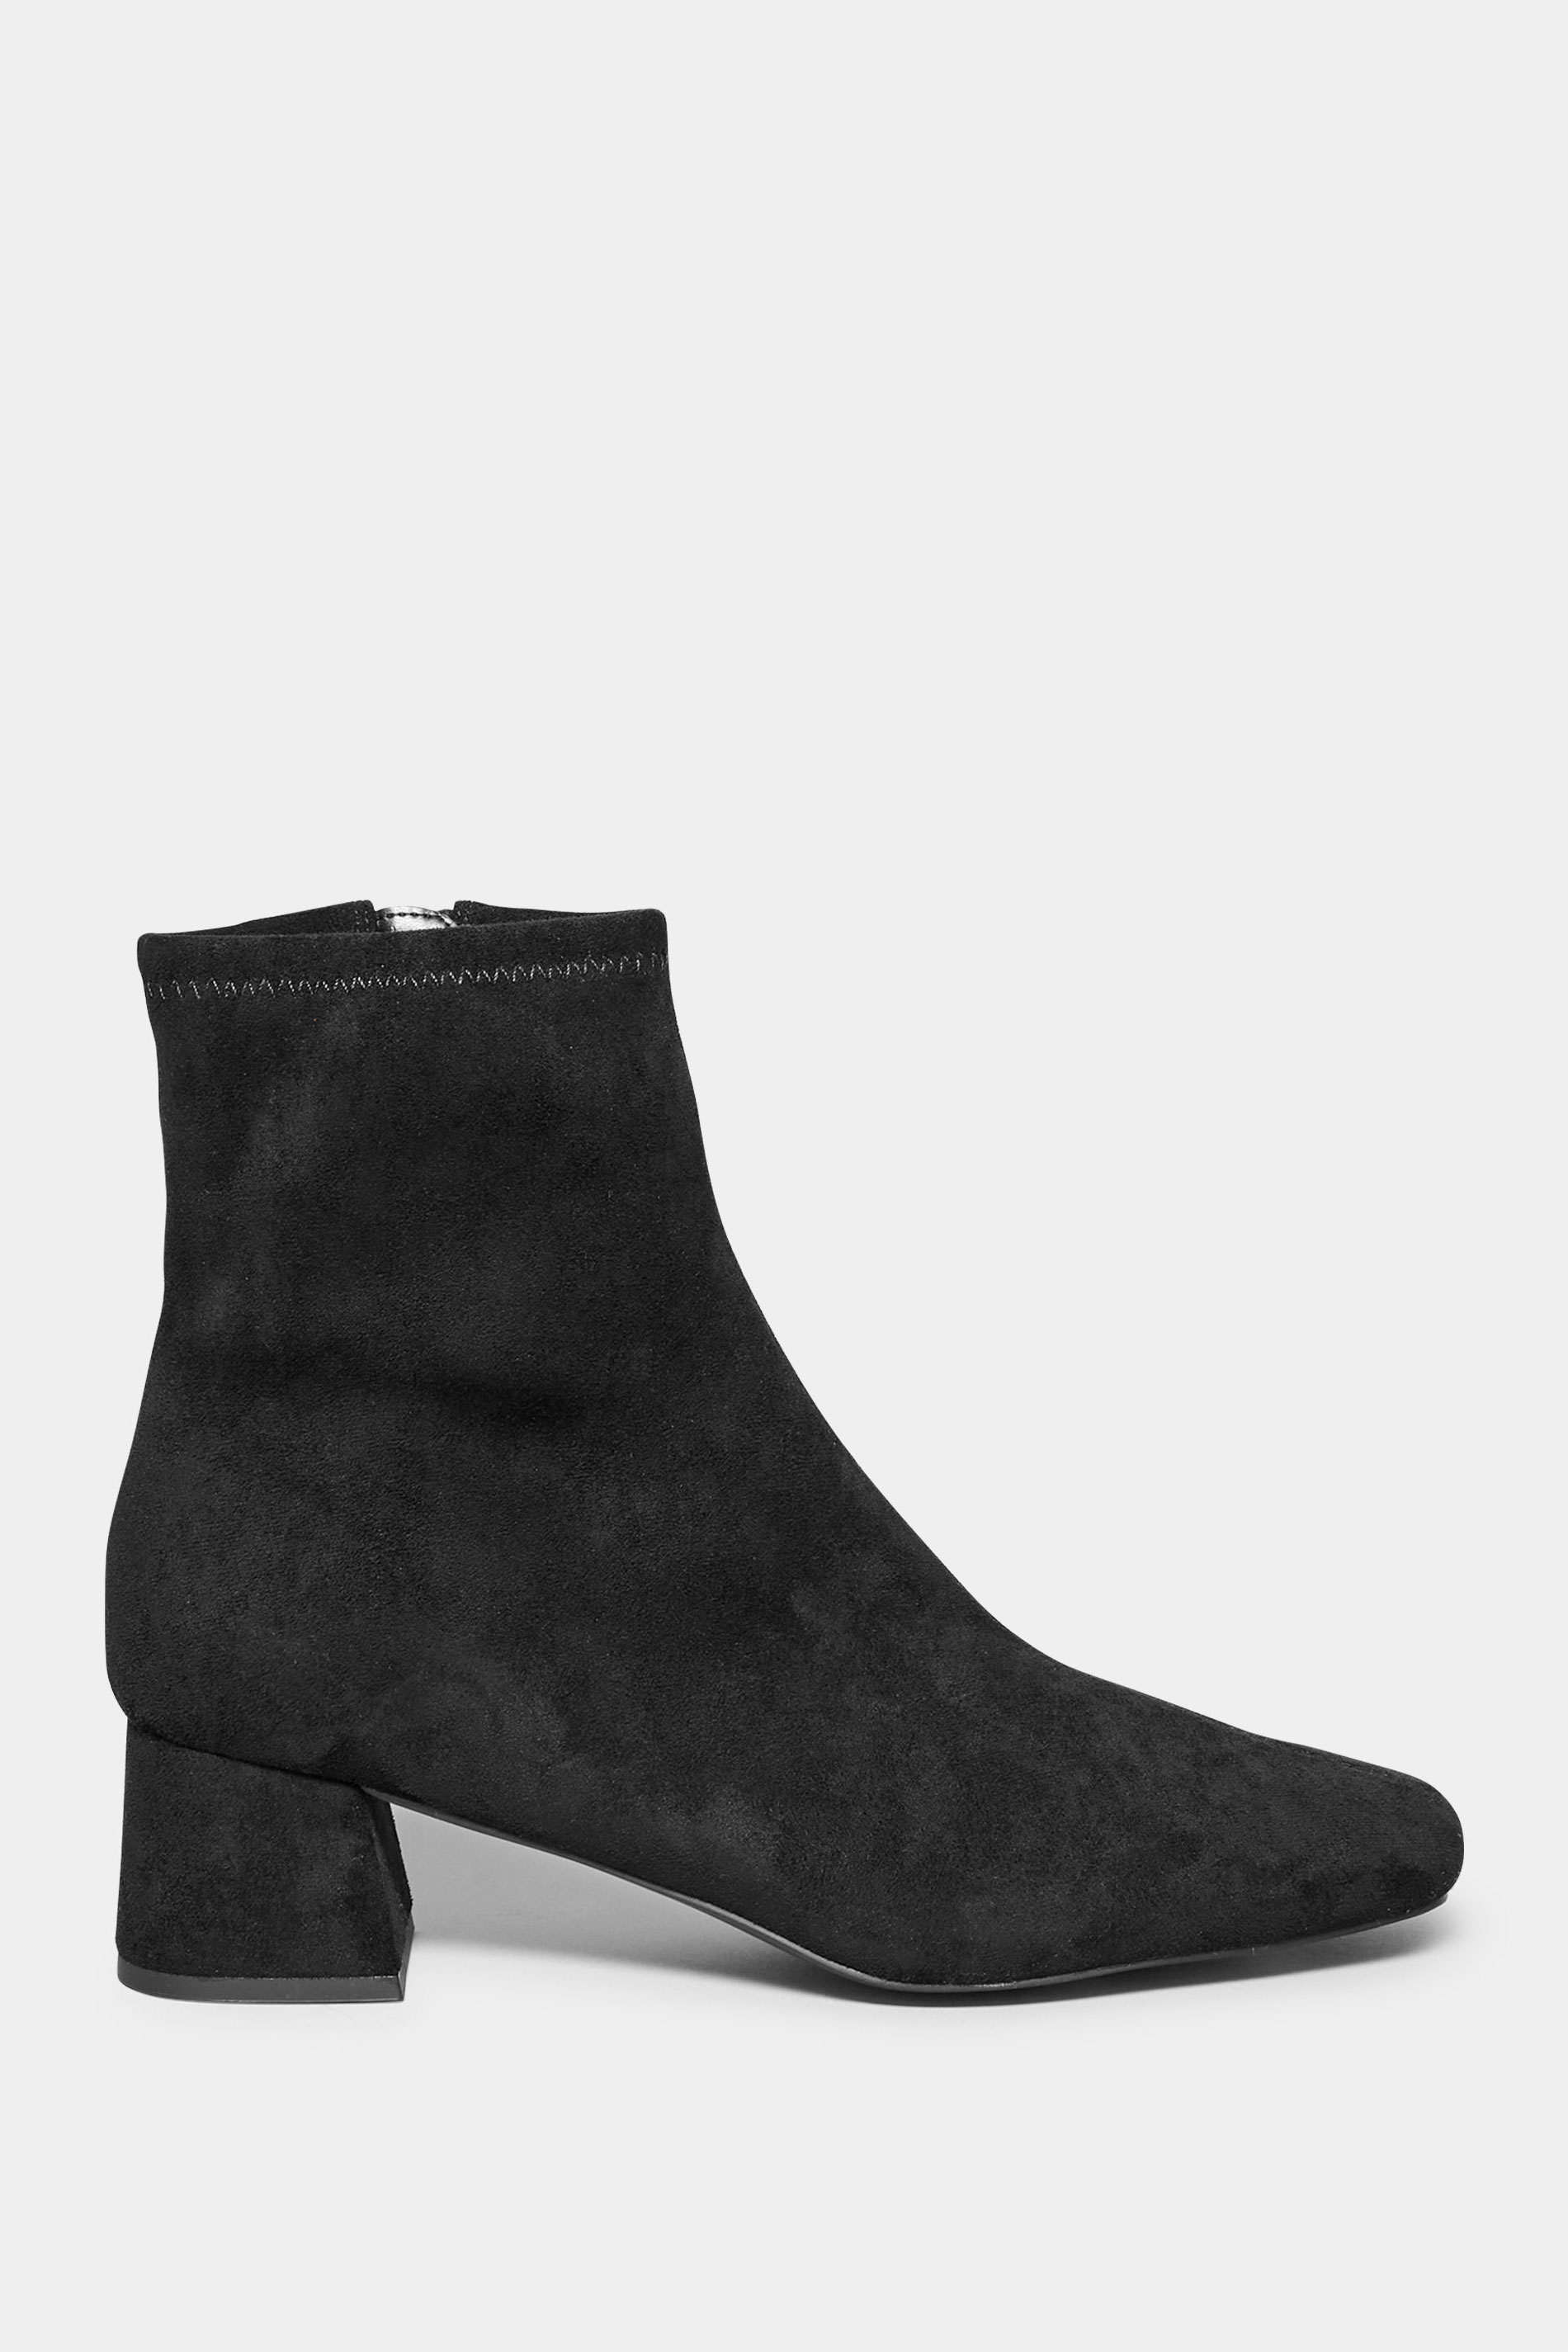 LTS Black Suede Block Heel Boots In Standard Fit | Long Tall Sally 3